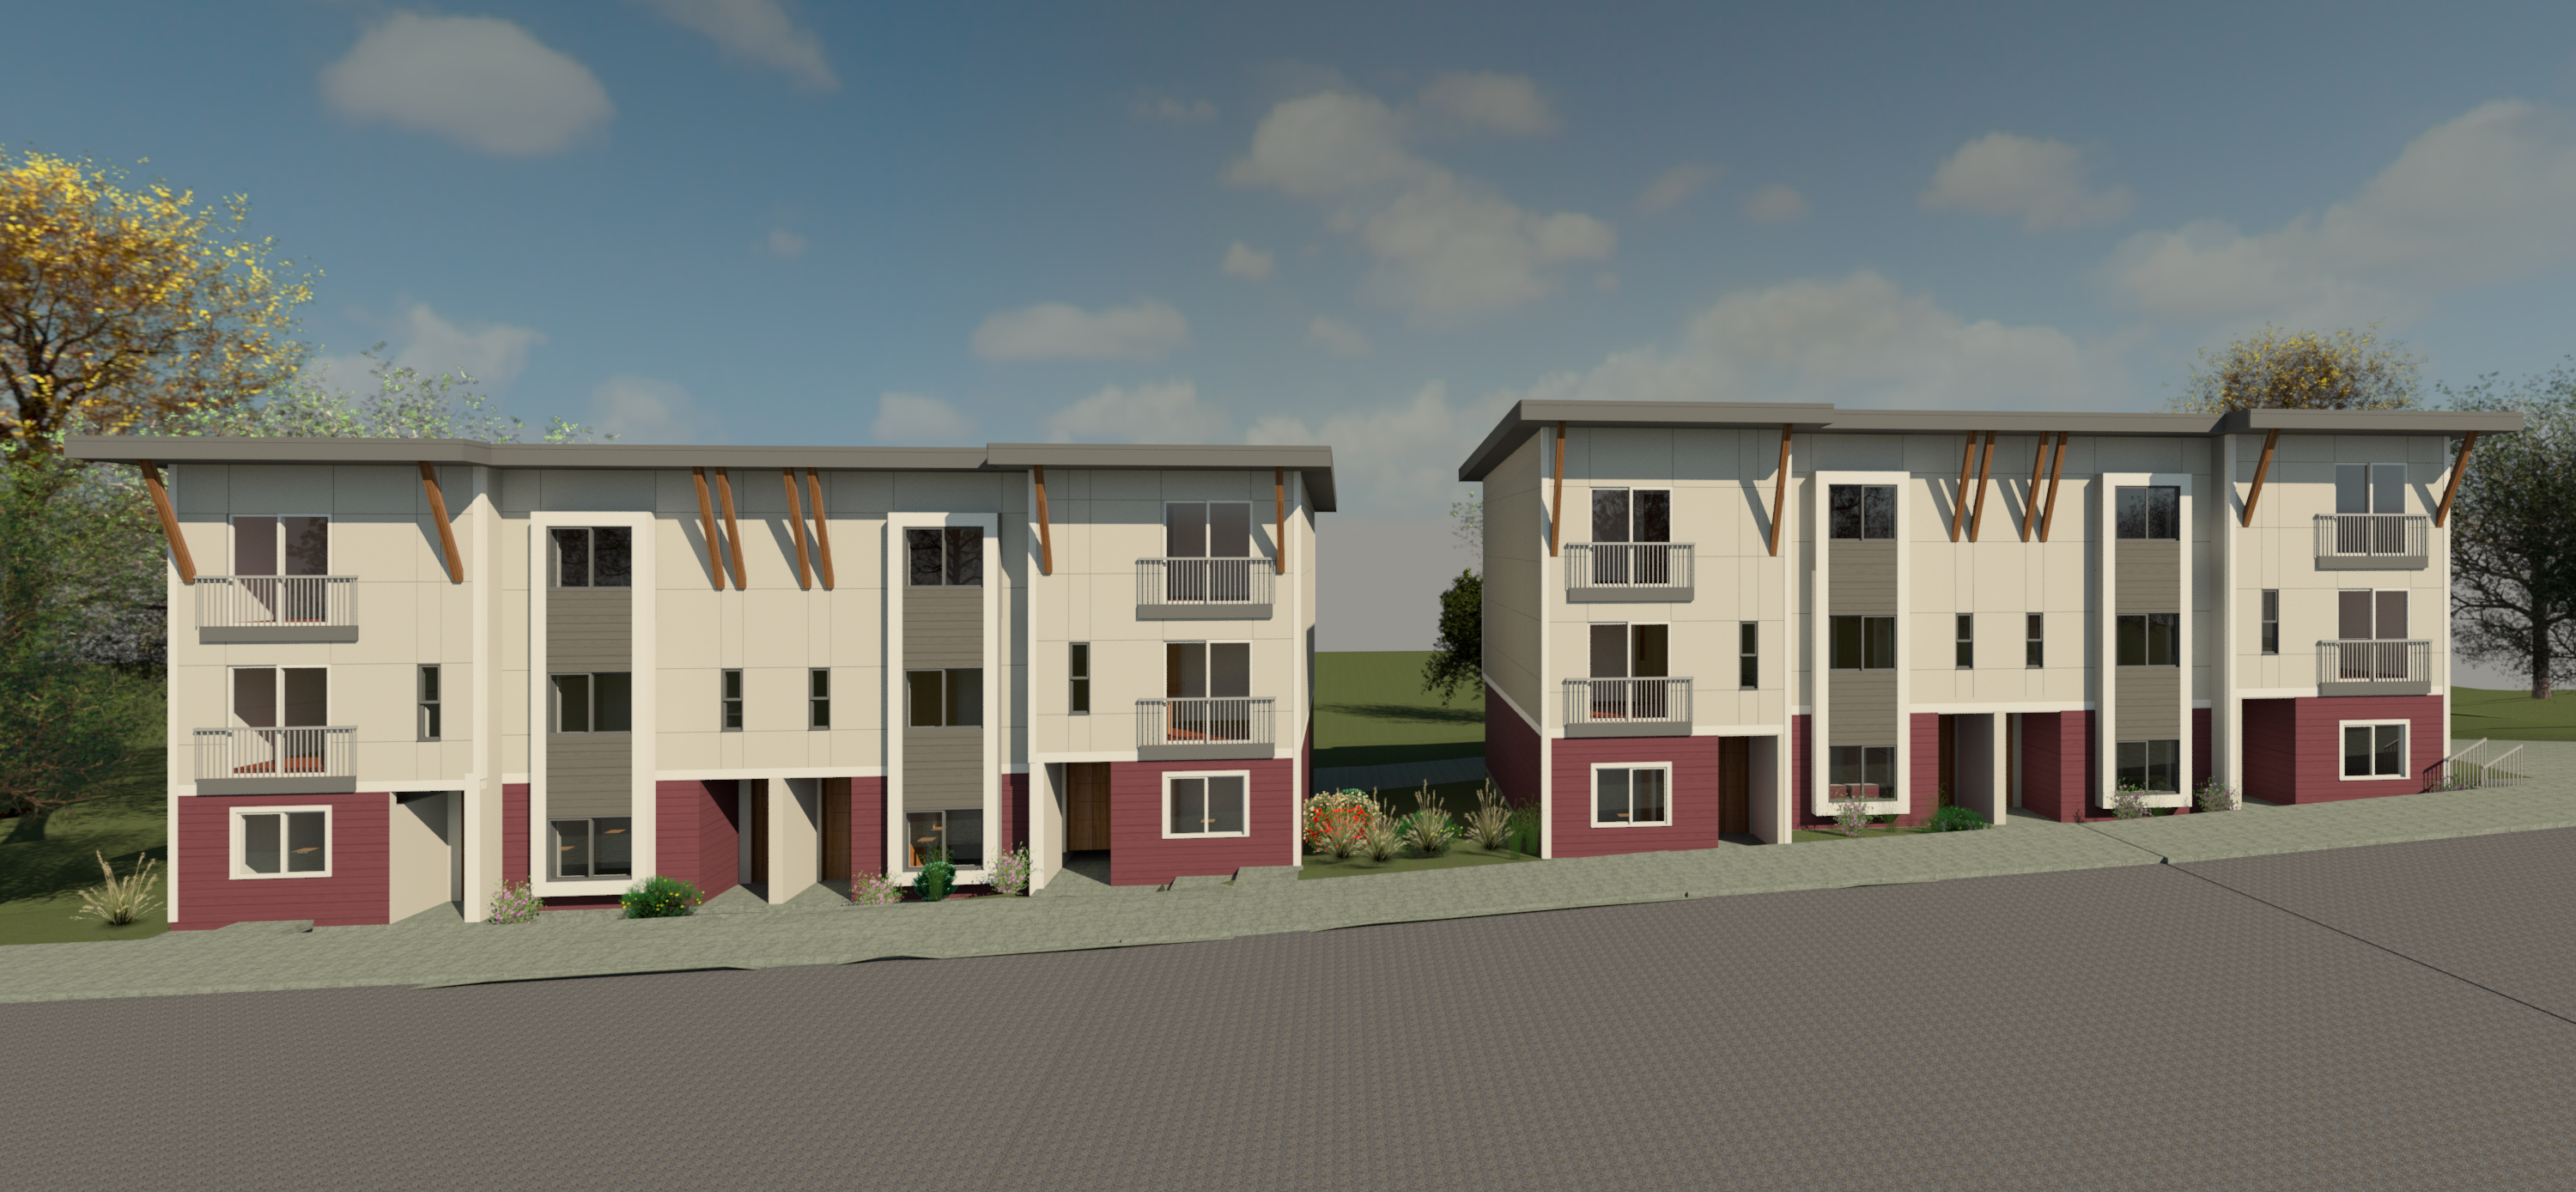 Rendering of two townhomes